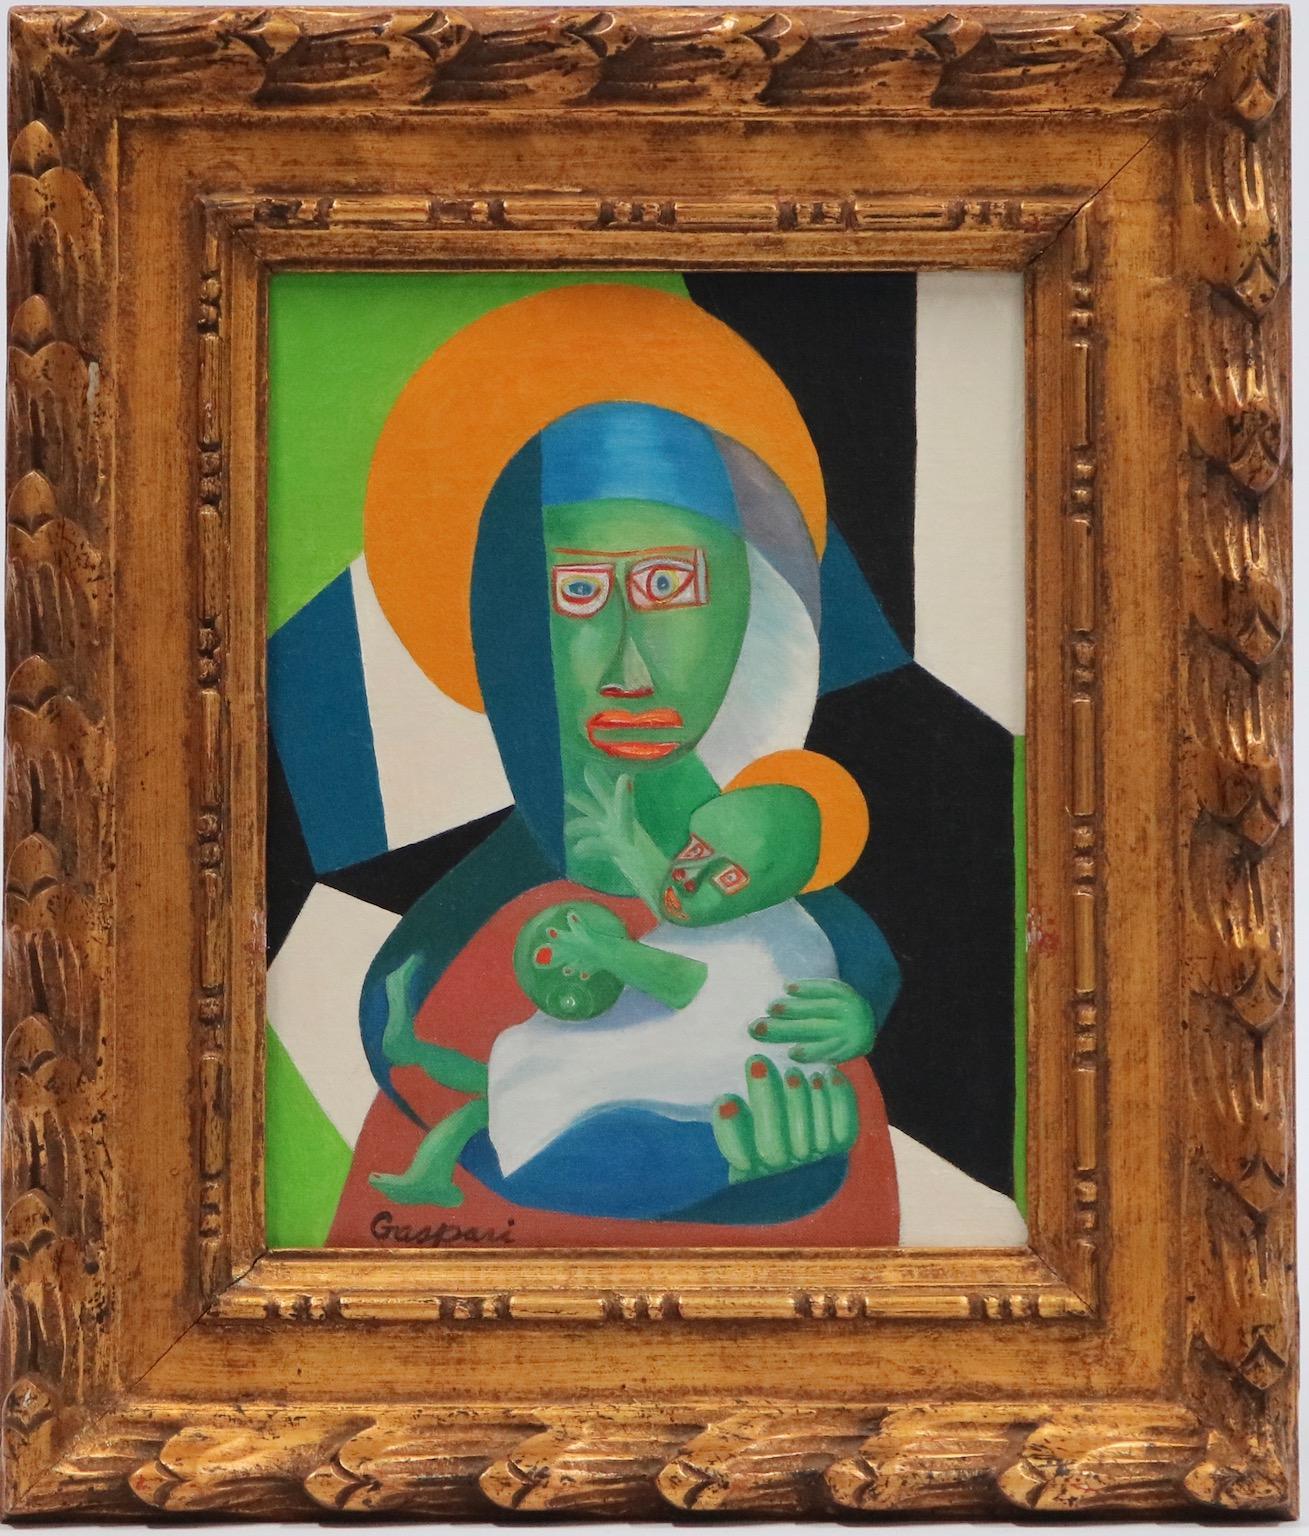 Cubist oil painting of the Madonna in giltwood frame. The figures are painted in bright shades of blue, green and orange. Signed in the bottom corner 'Gaspari.' Wear appropriate to age and use. The painting remains in very good condition. 

Noted